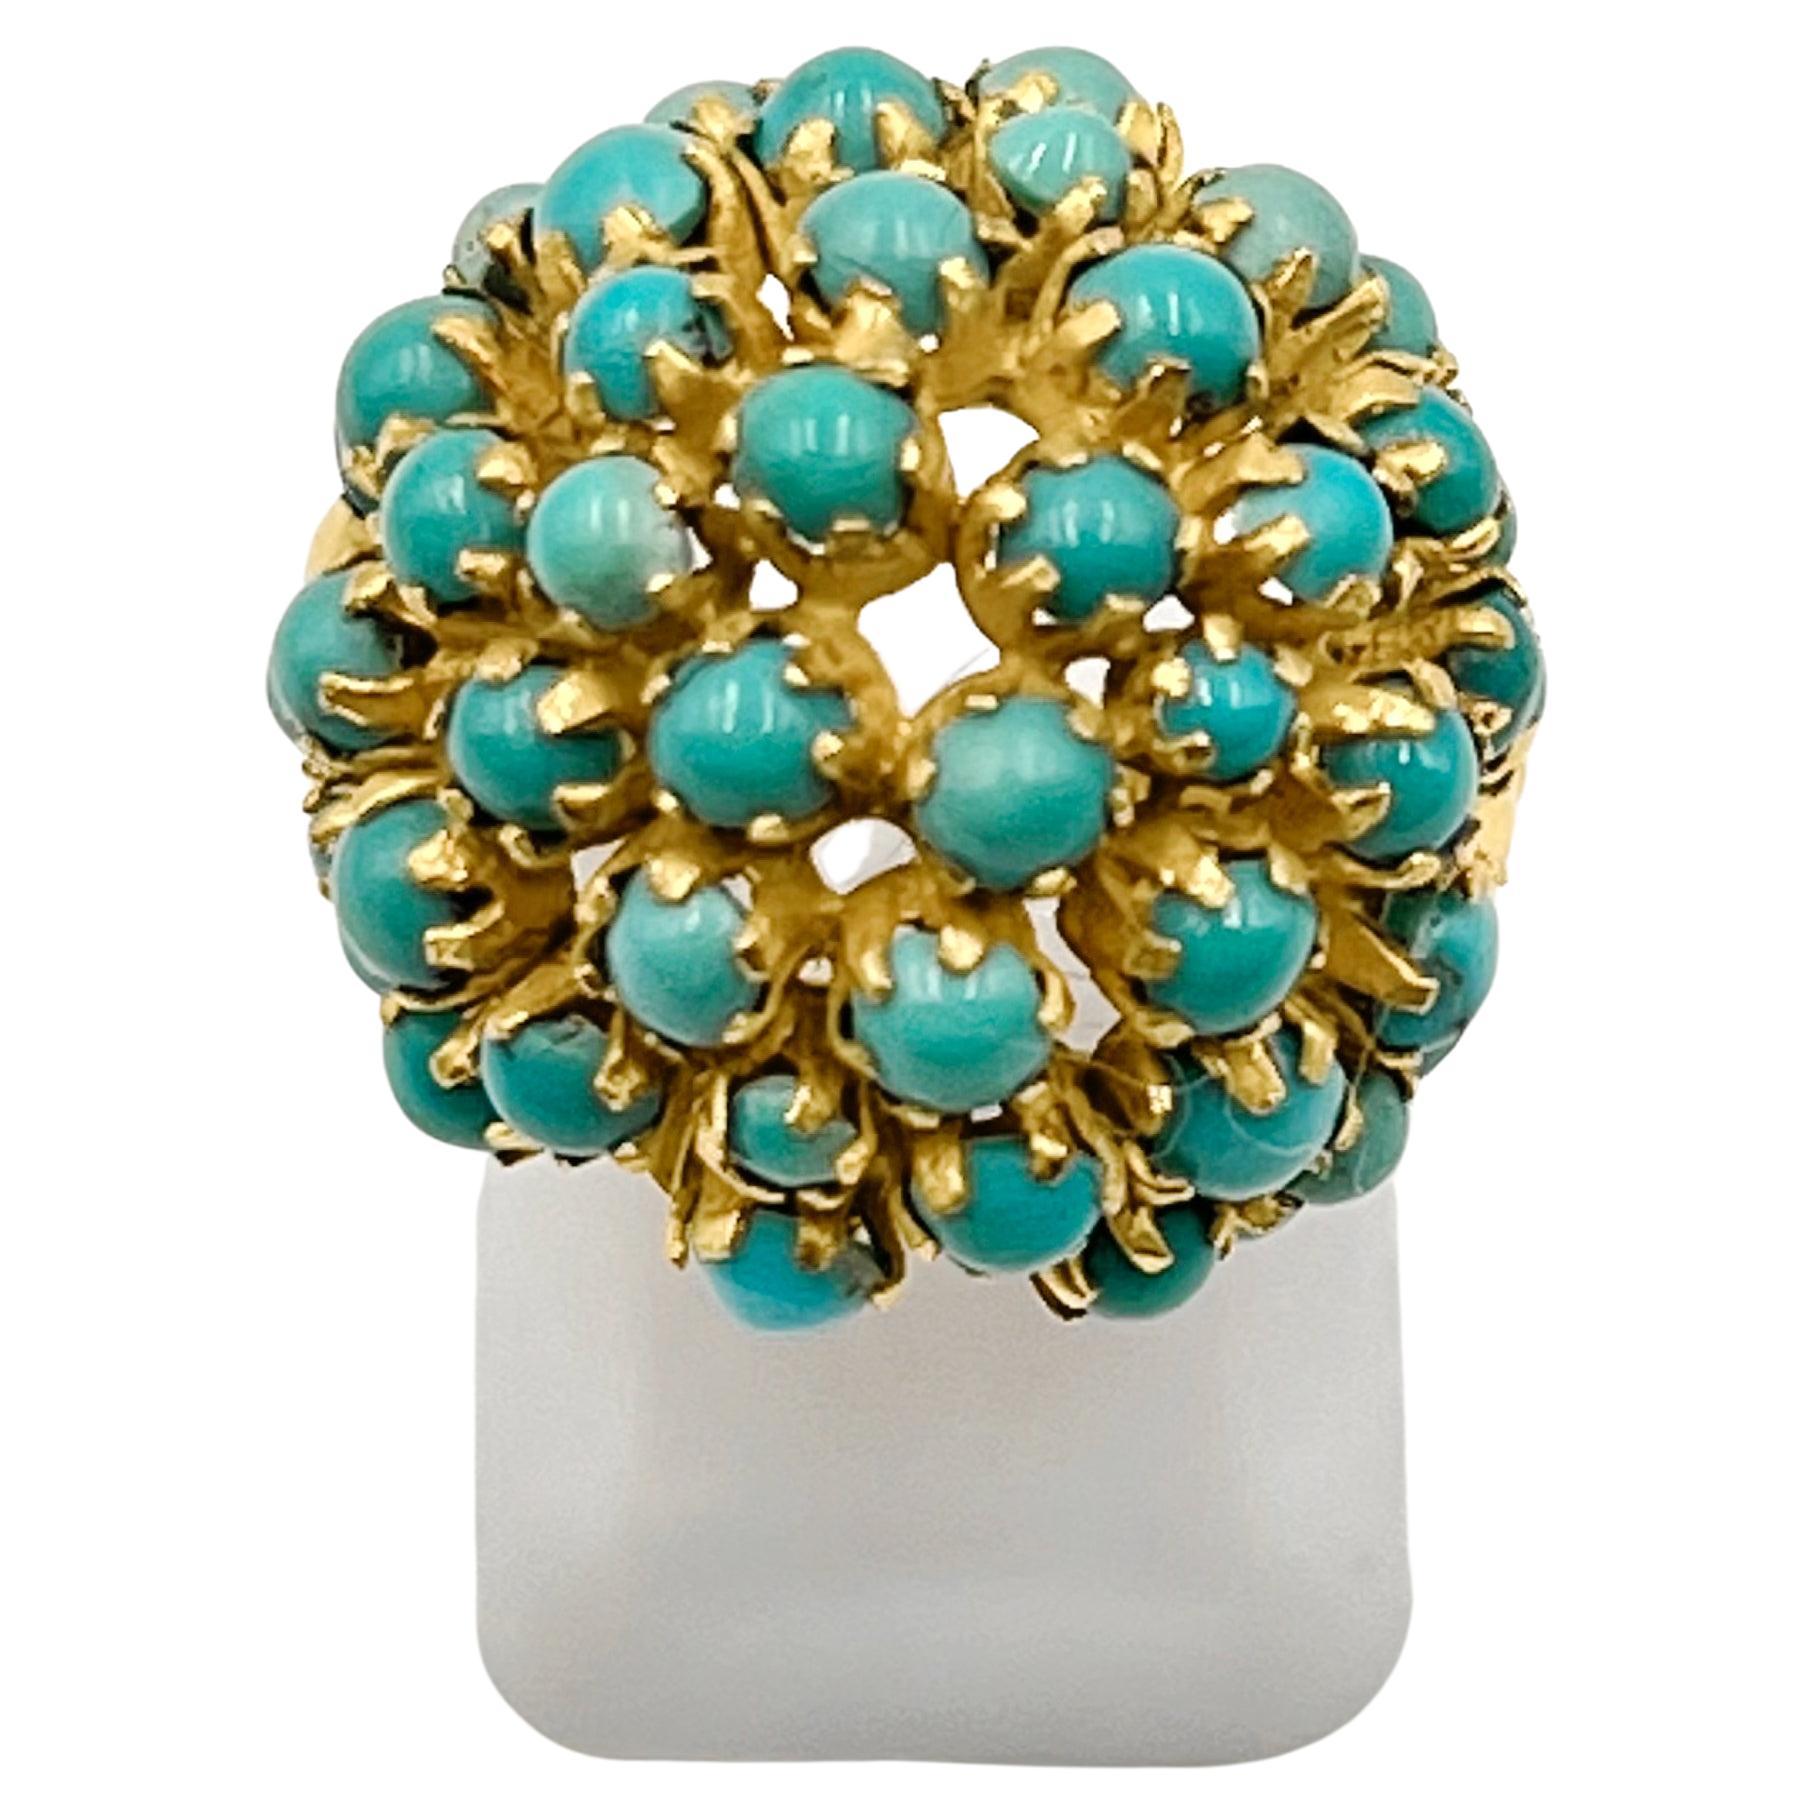 1970s domed cocktail ring, set with cabochon-cut natural turquoise in 18k yellow gold.  Open-work mounting featuring forty-eight 2.25-3.5mm circular cabochon-cut, natural turquoise stones.  Blue to greenish-Blue colors.  Polished button accent with